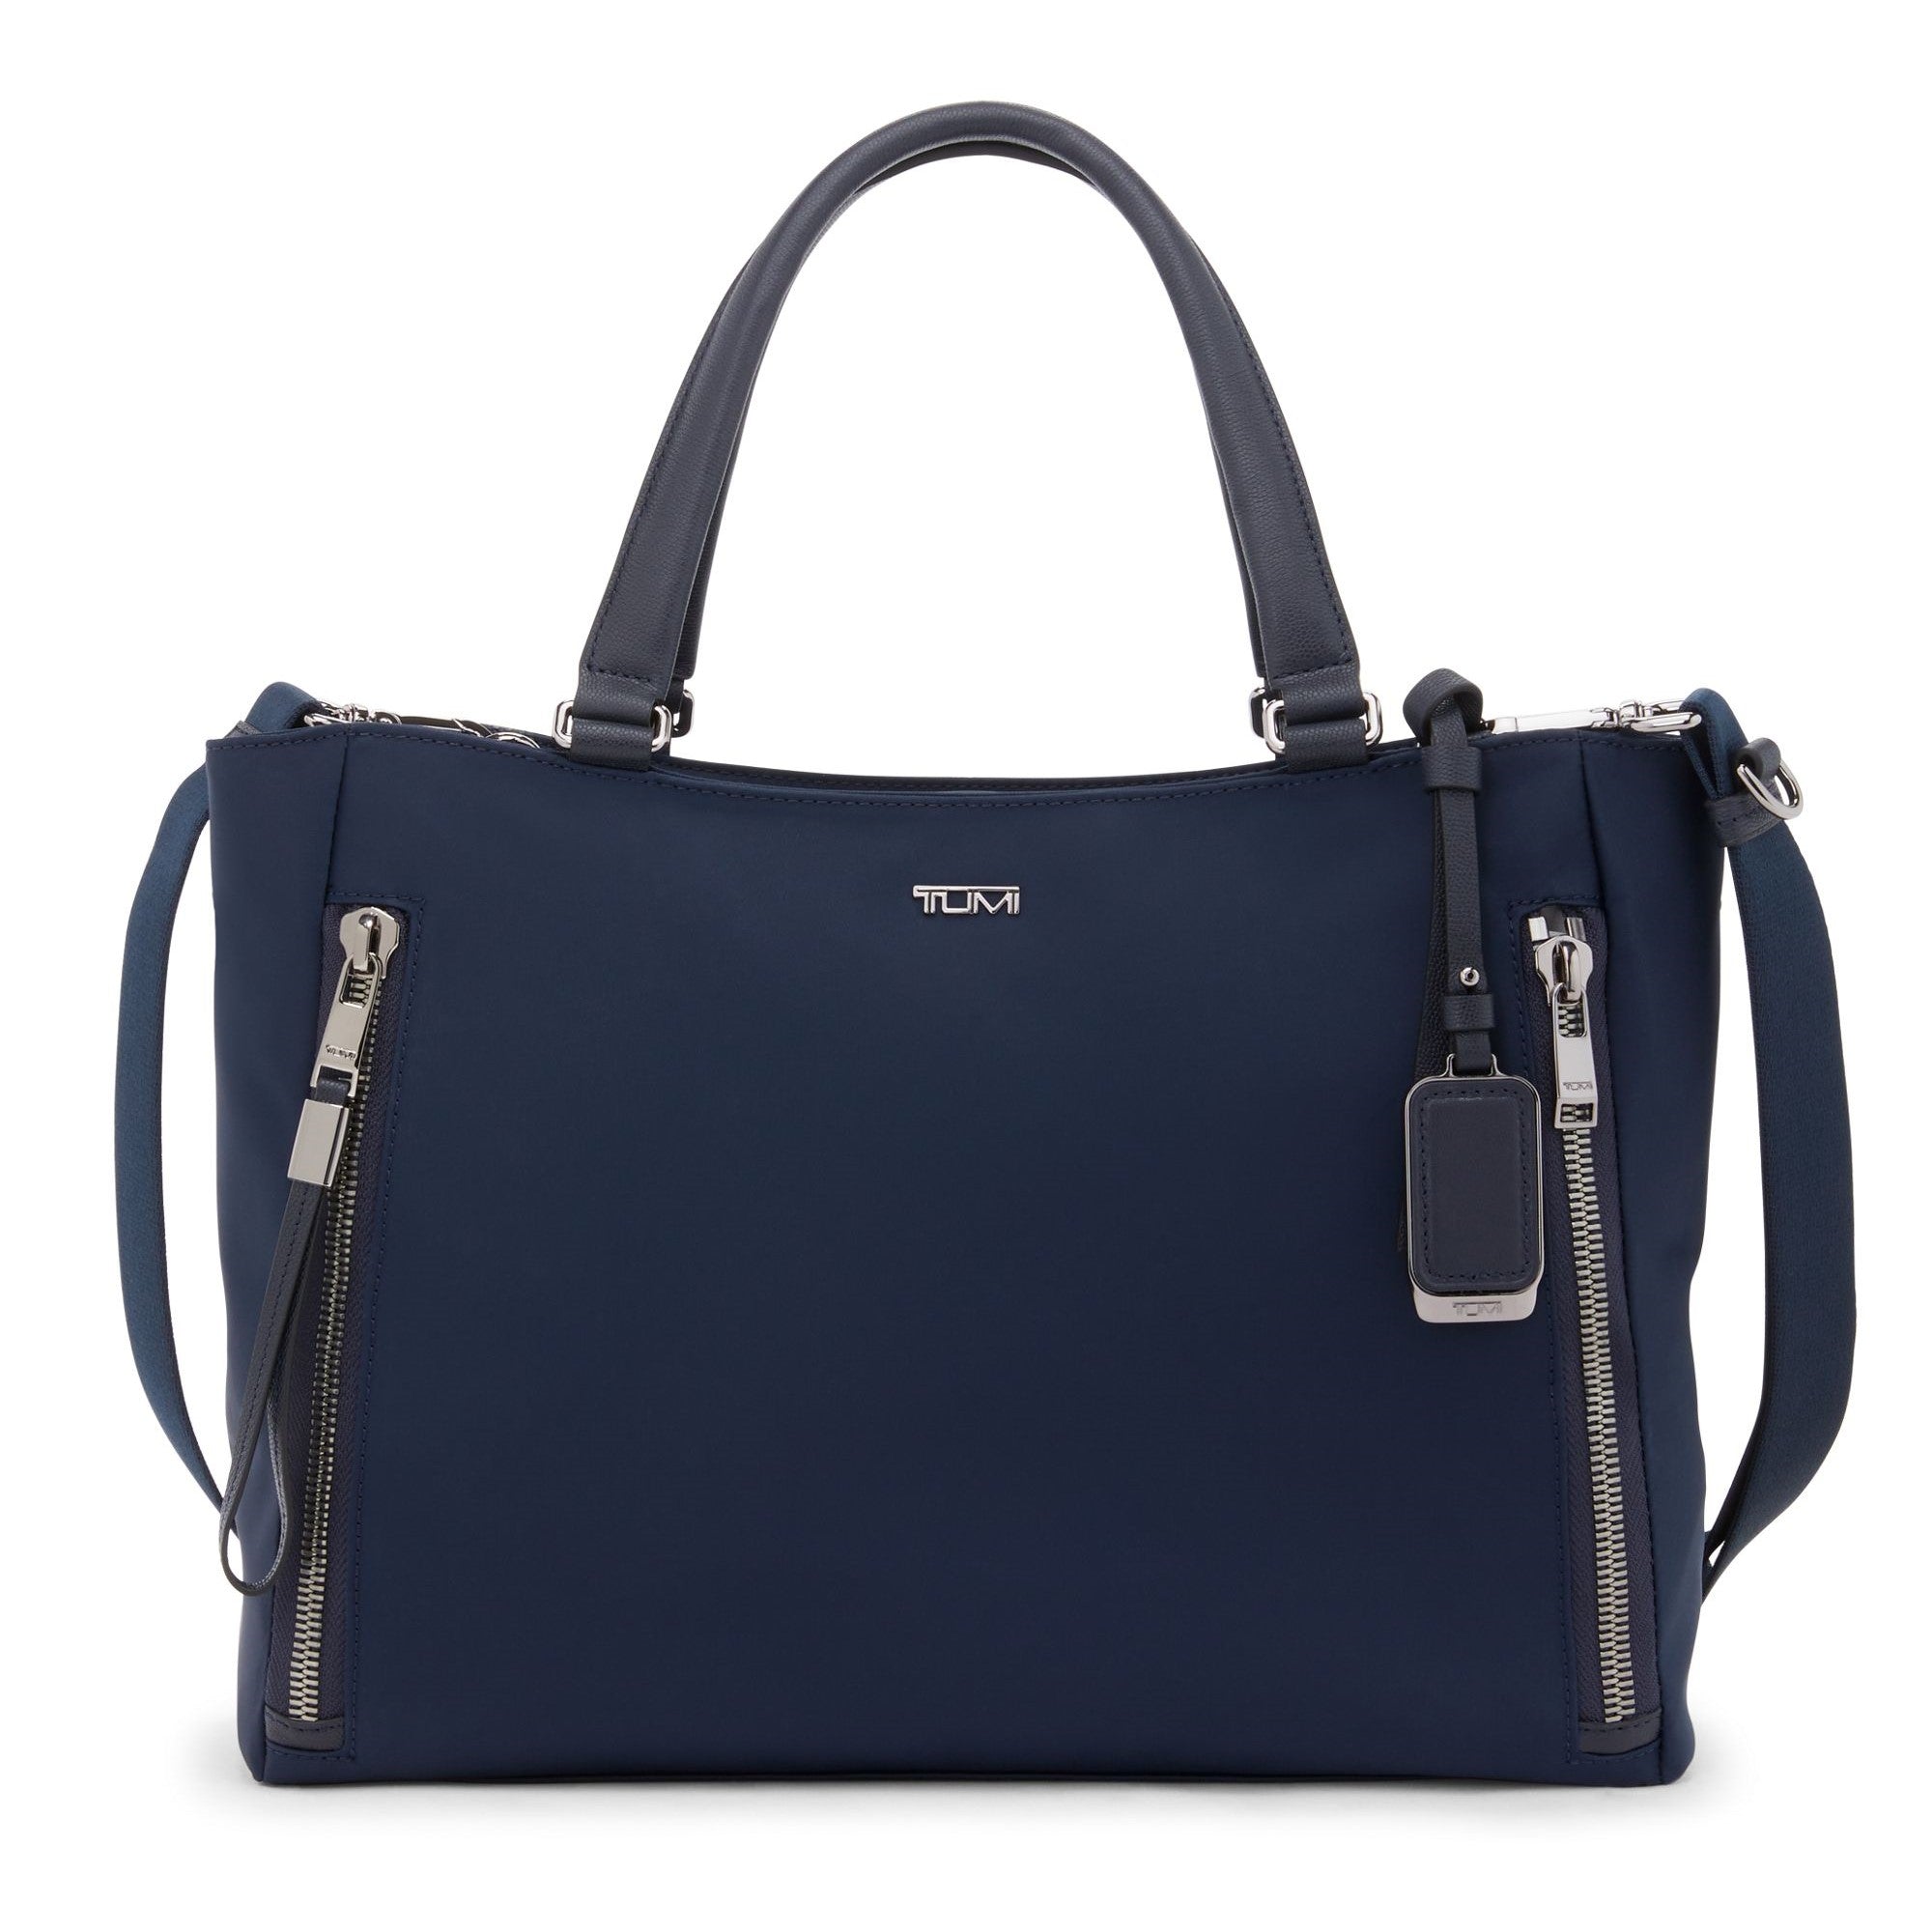 DKNY cross body bag Bryant Park Dome CBO Blu Combo | Buy bags, purses &  accessories online | modeherz